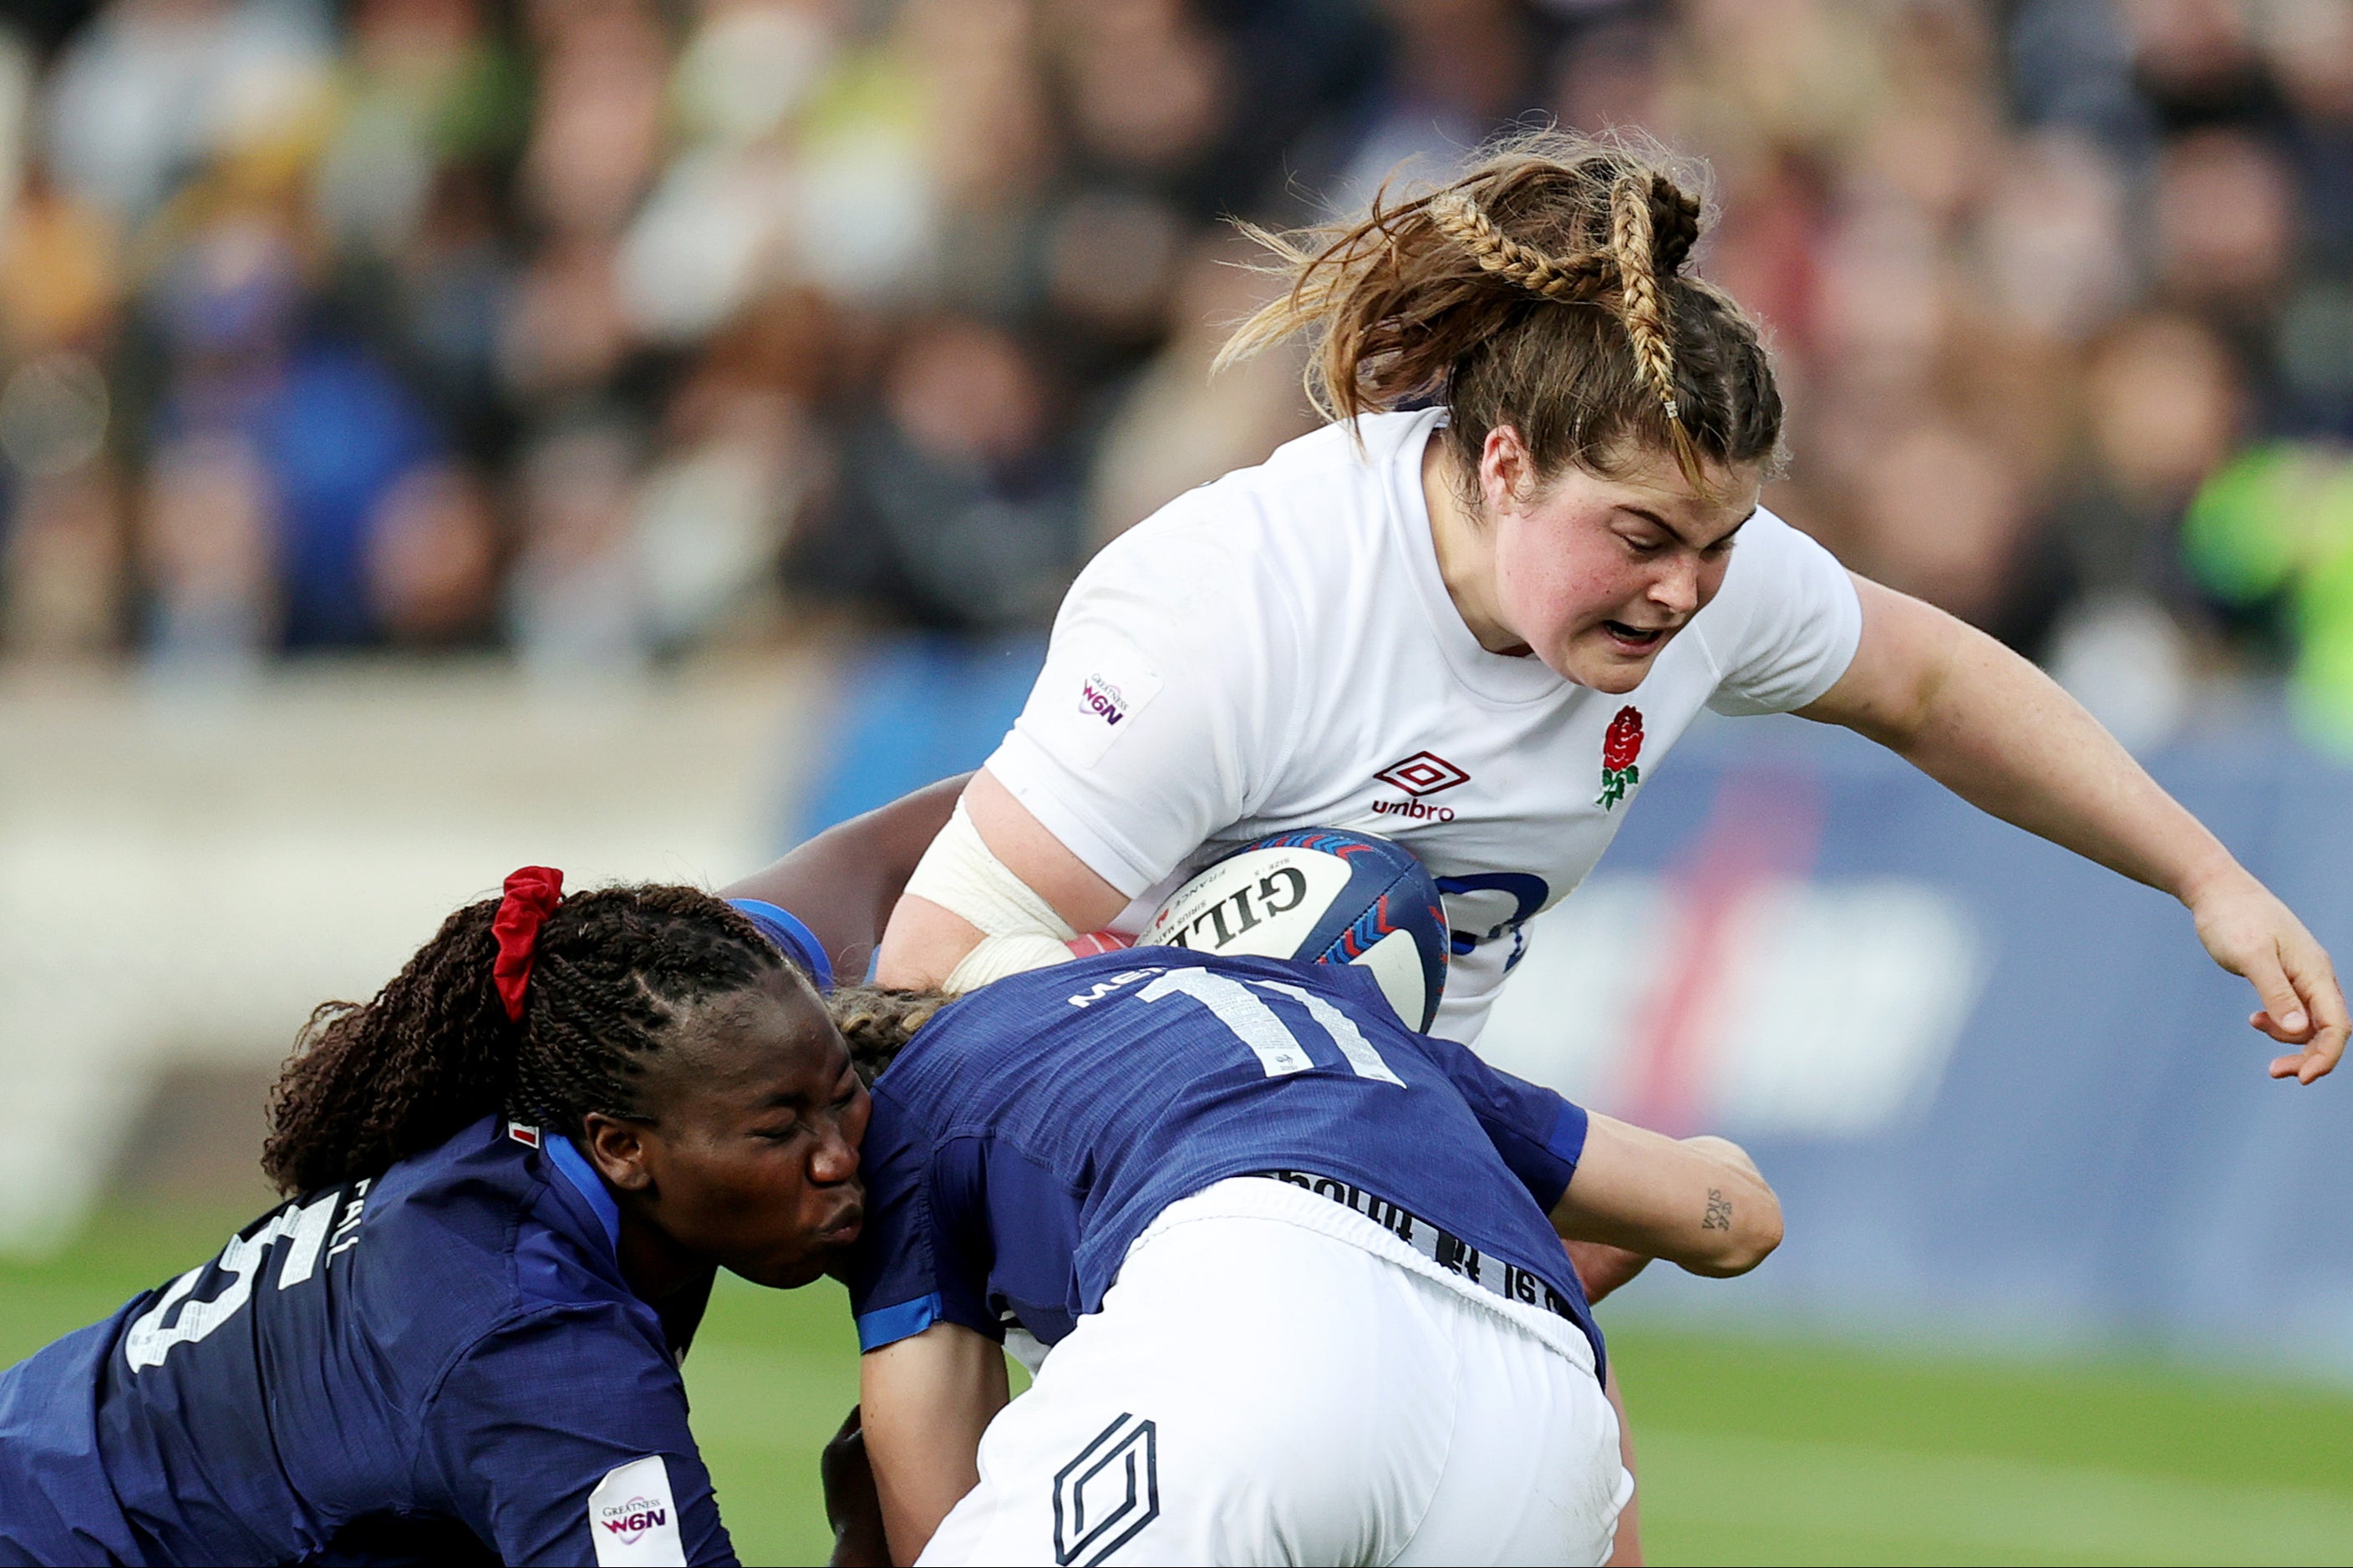 Maud Muir drives forward for the Red Roses